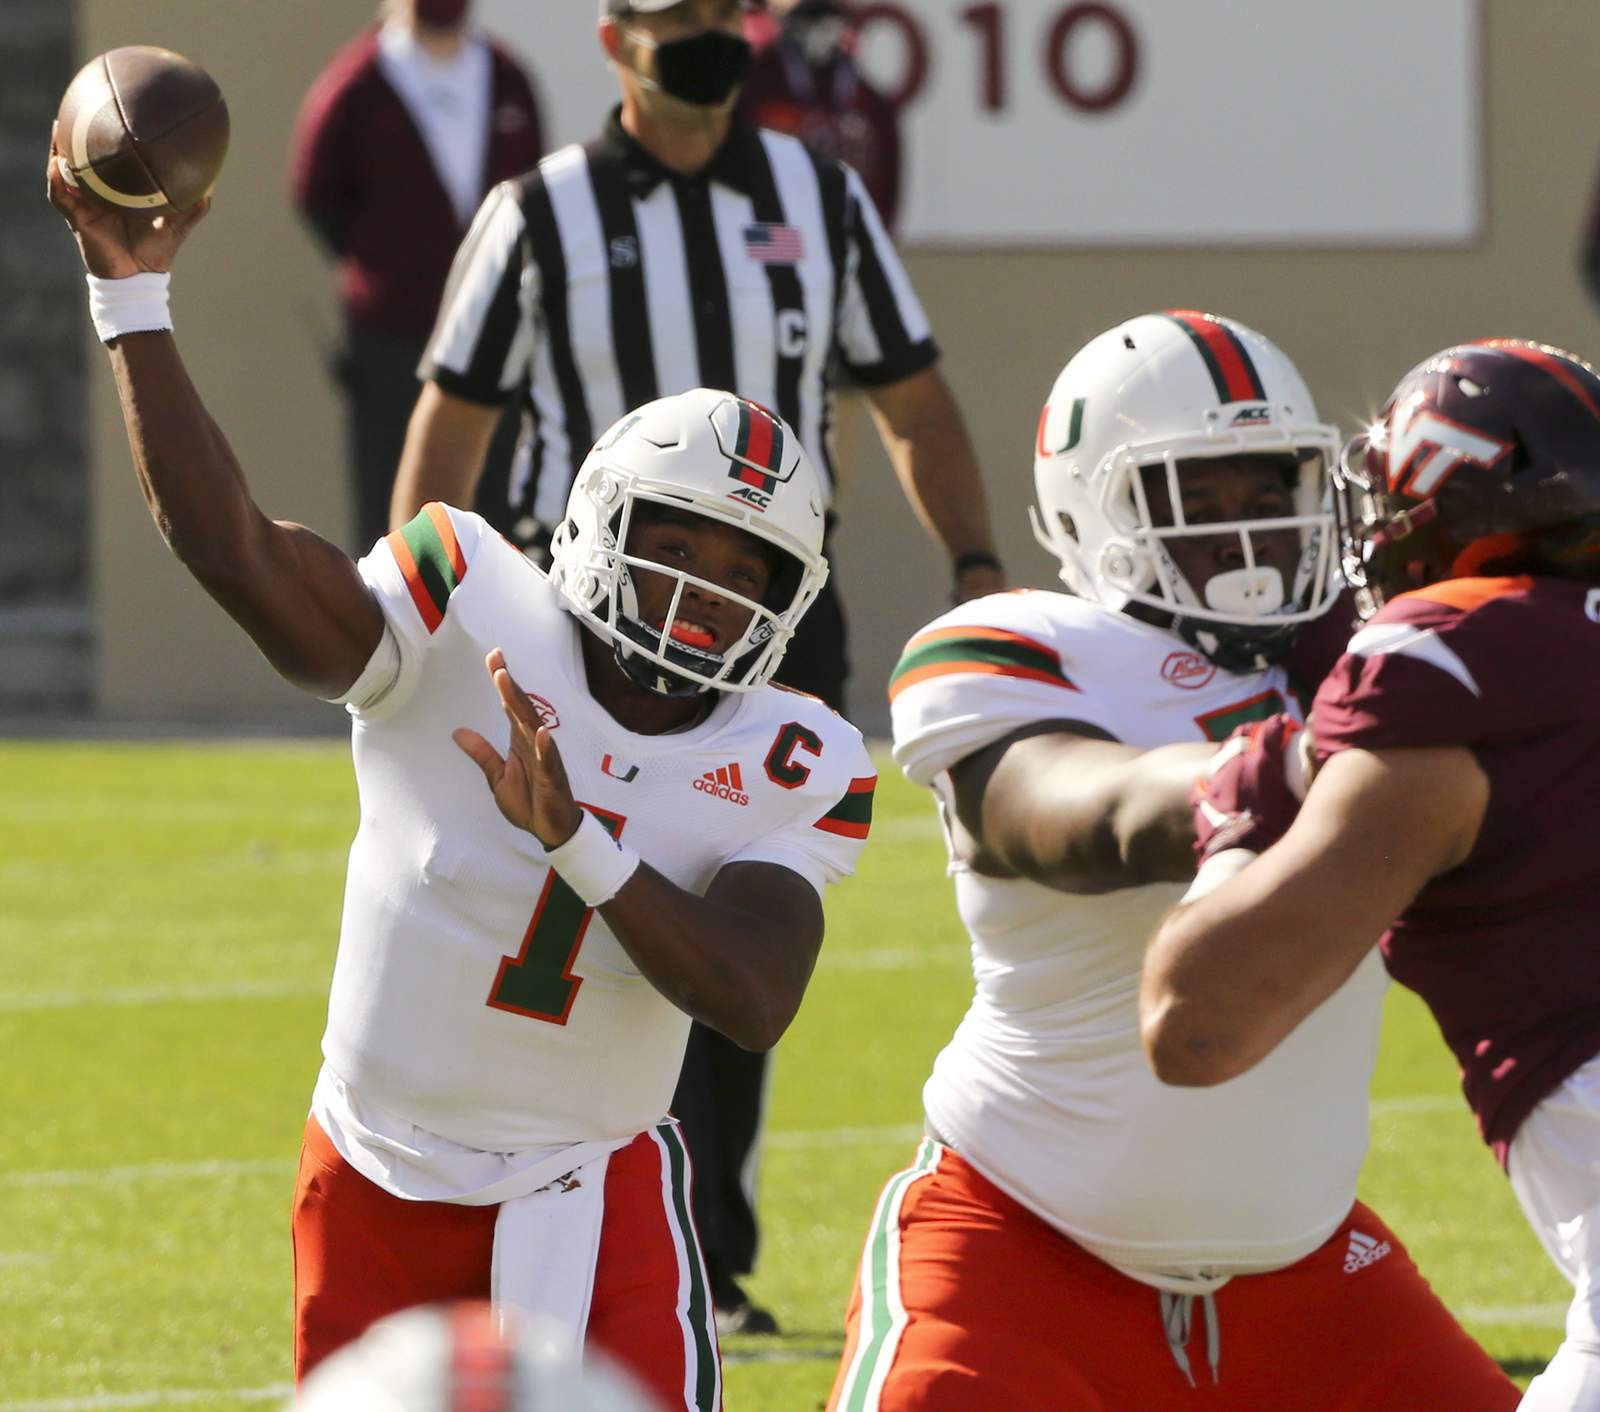 No. 9 Miami rallies behind King, D to be beat VTech 25-24